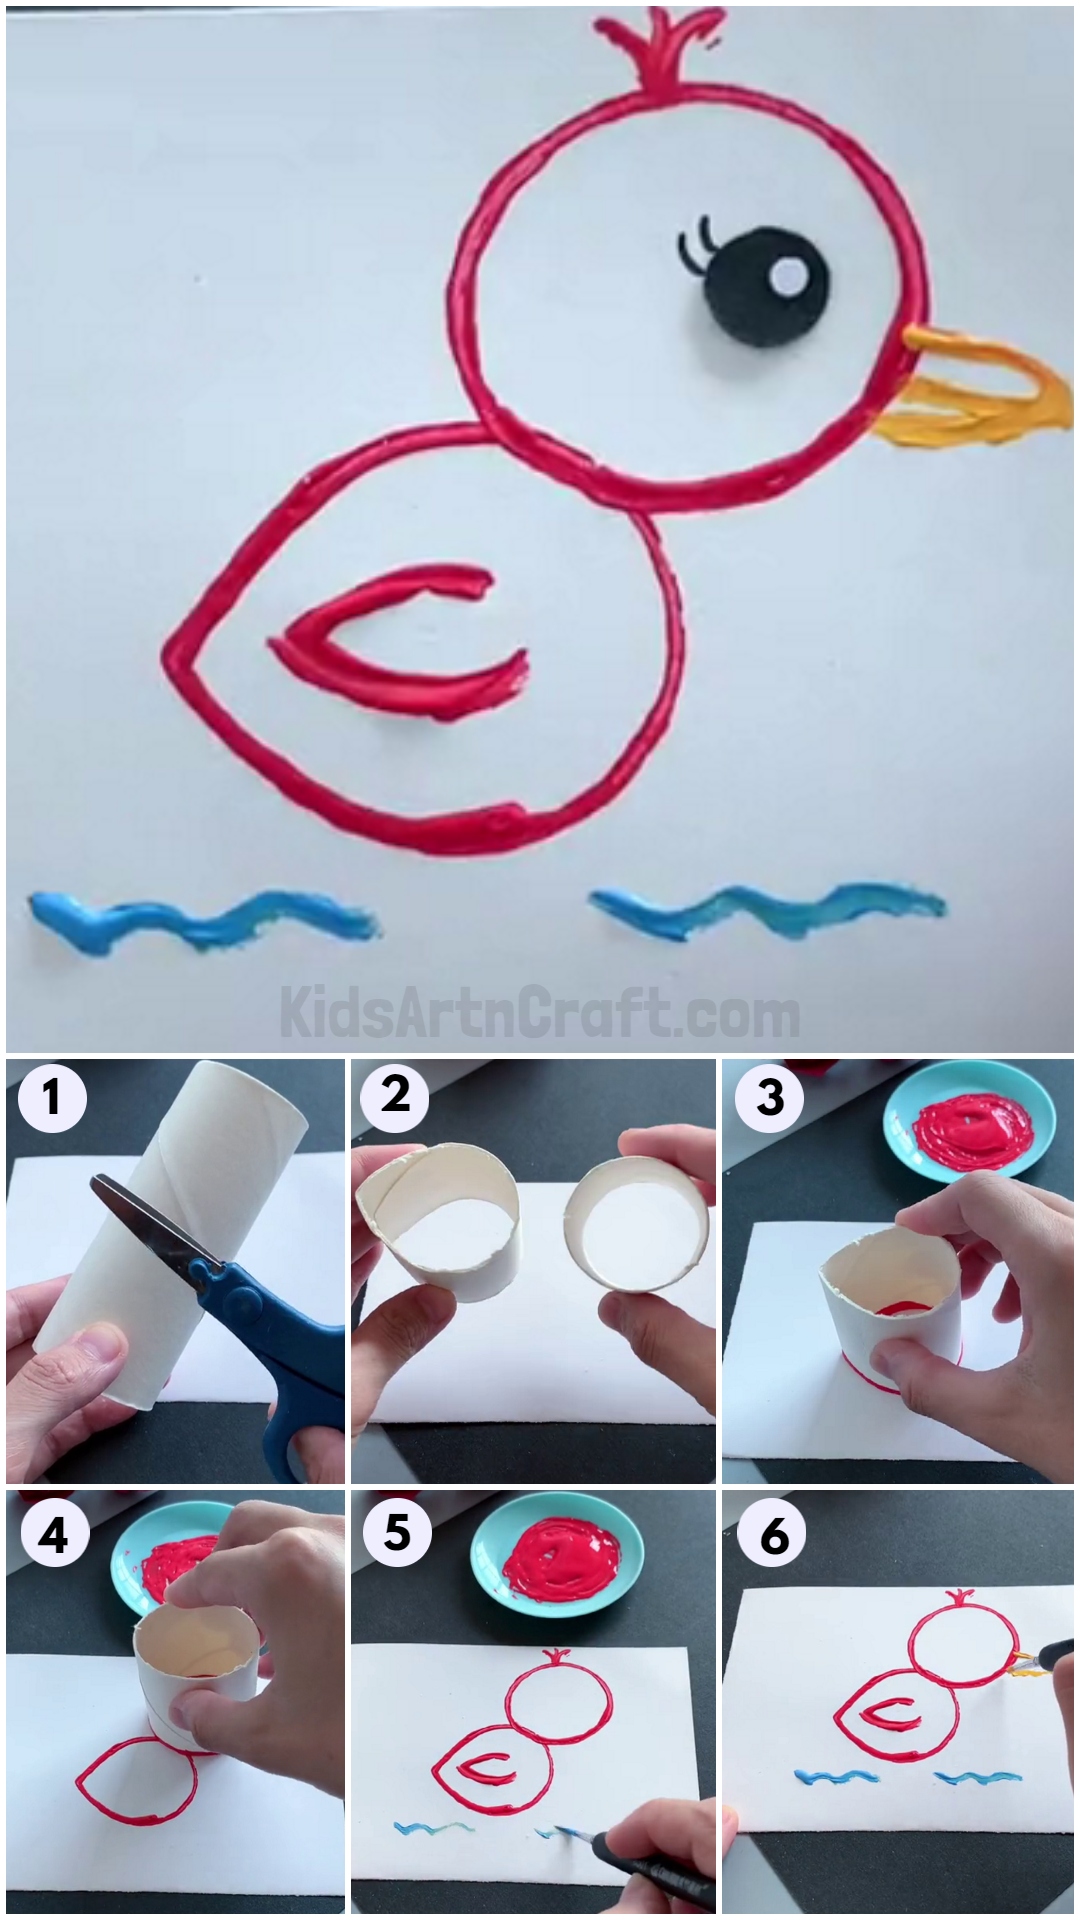 Learn To make Duck Artwork For Kids Using Watercolor & Toilet Paper Roll